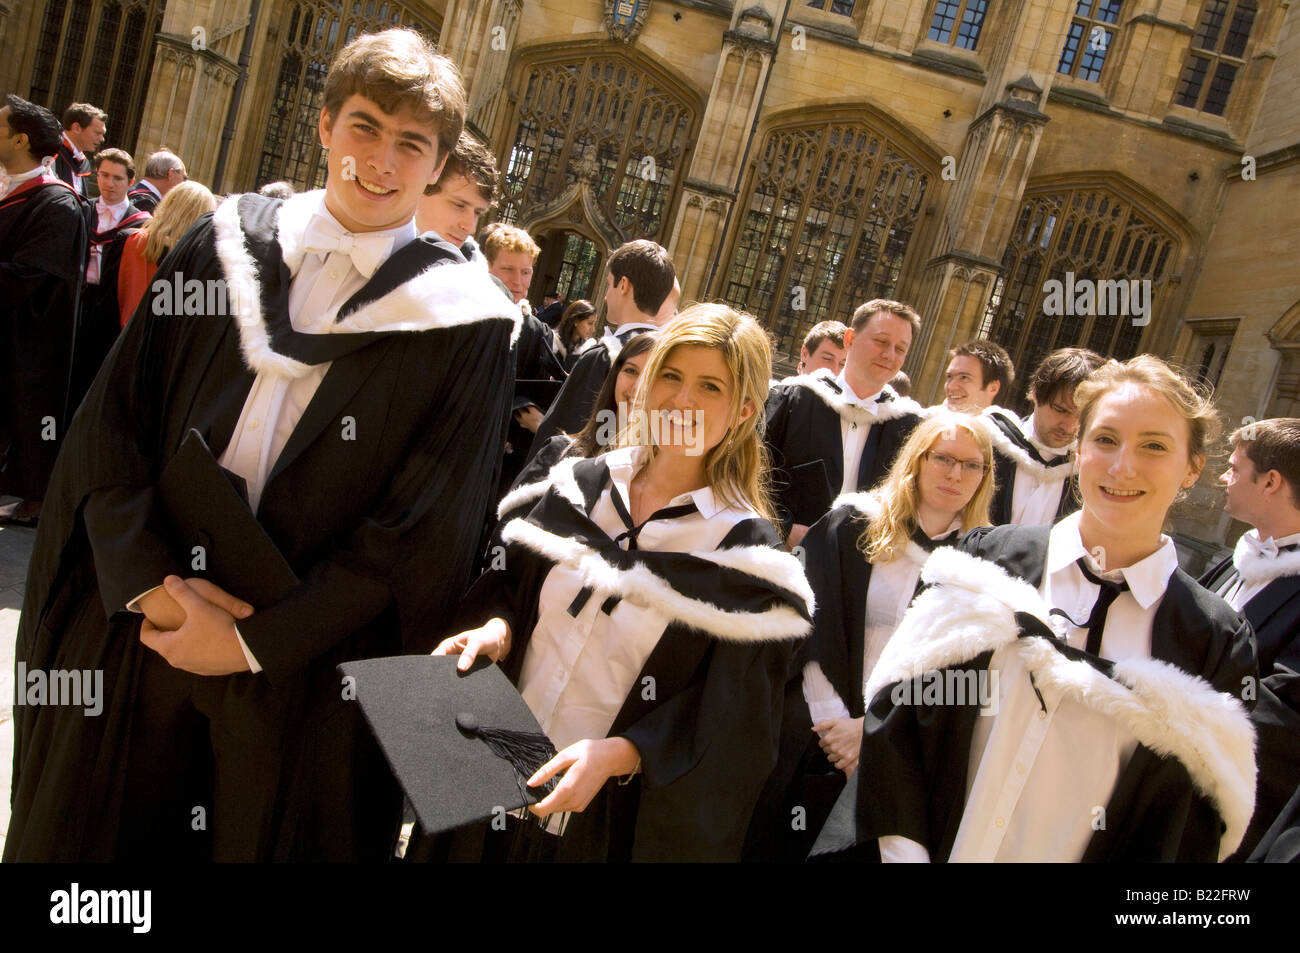 Getting your degree,a ceremony at Oxford University with coloured gowns